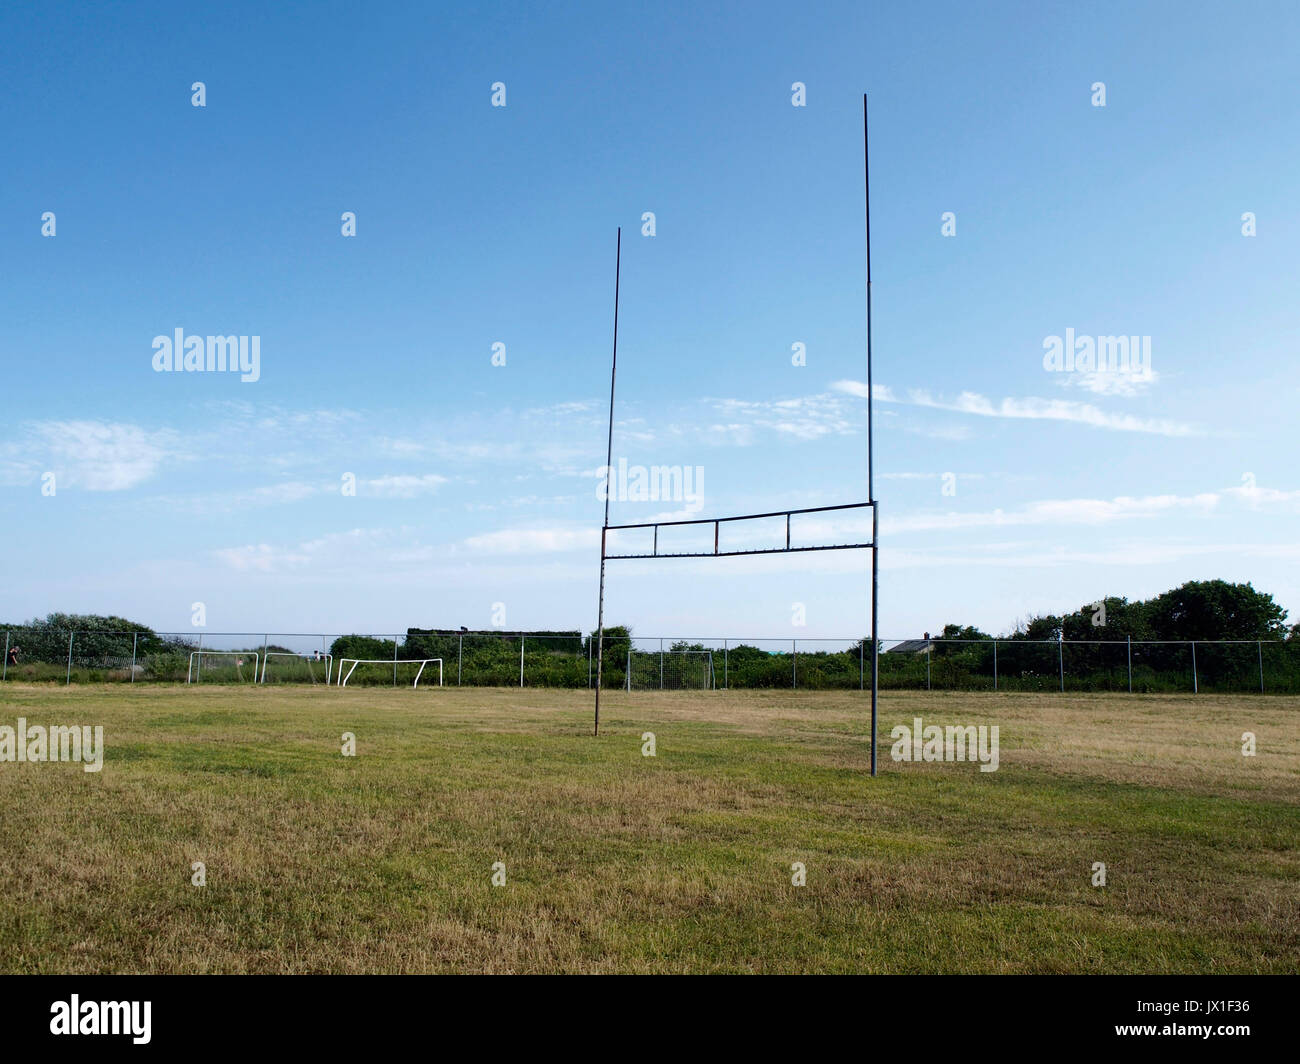 Goalposts in a playground of football Stock Photo